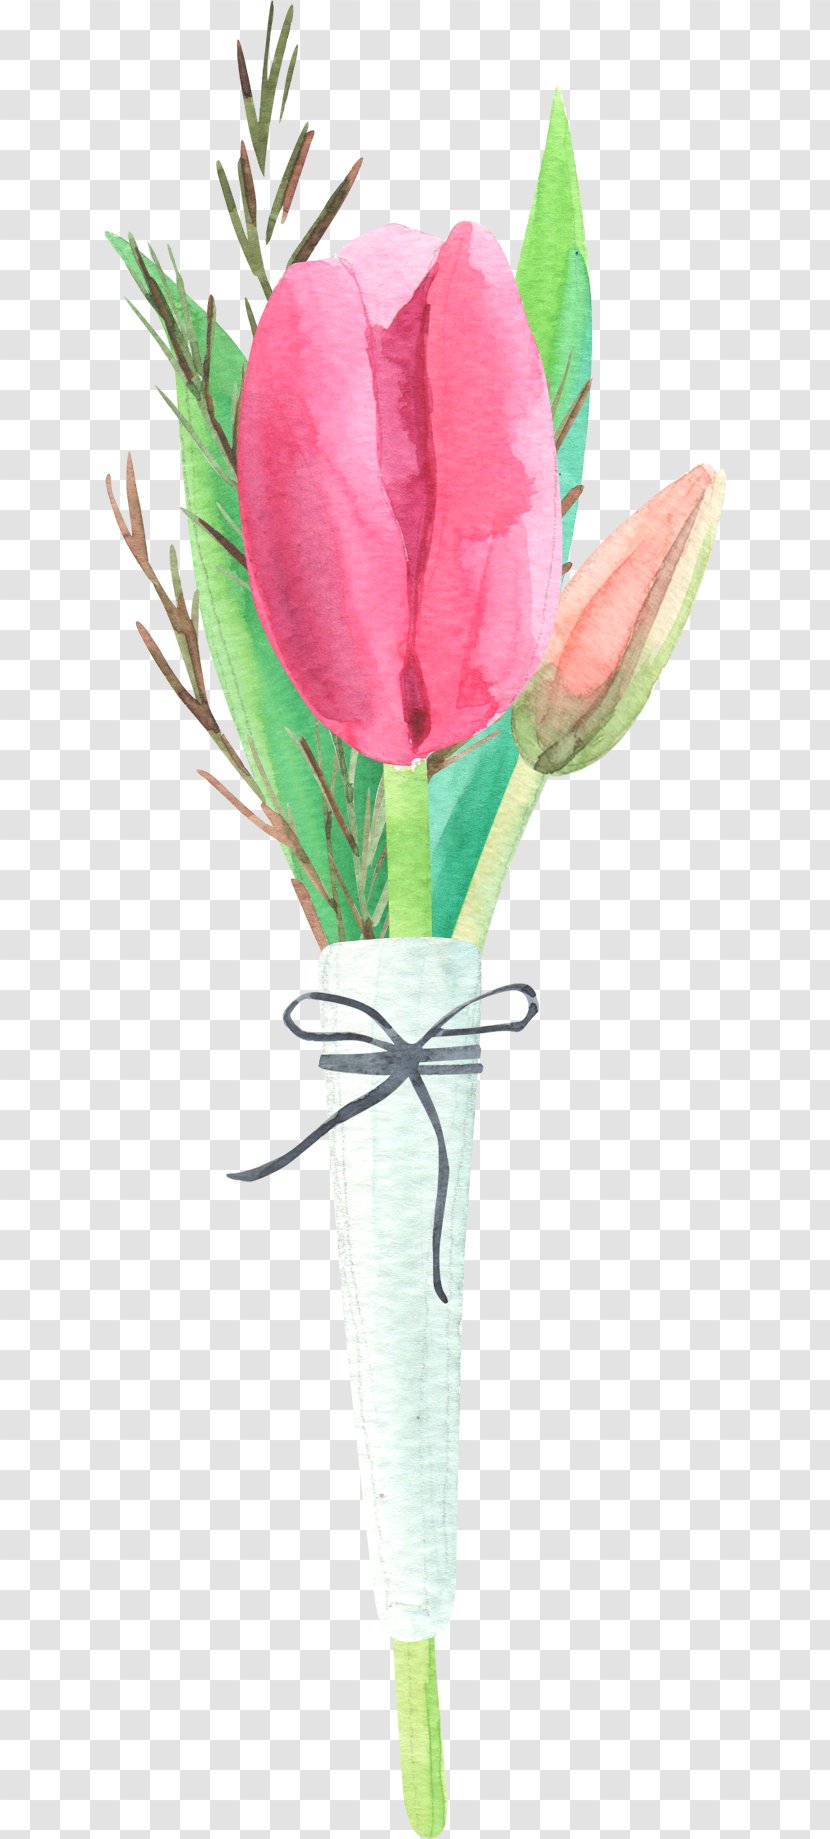 Tulip Flower Floral Design - Bow And Tulips Transparent PNG